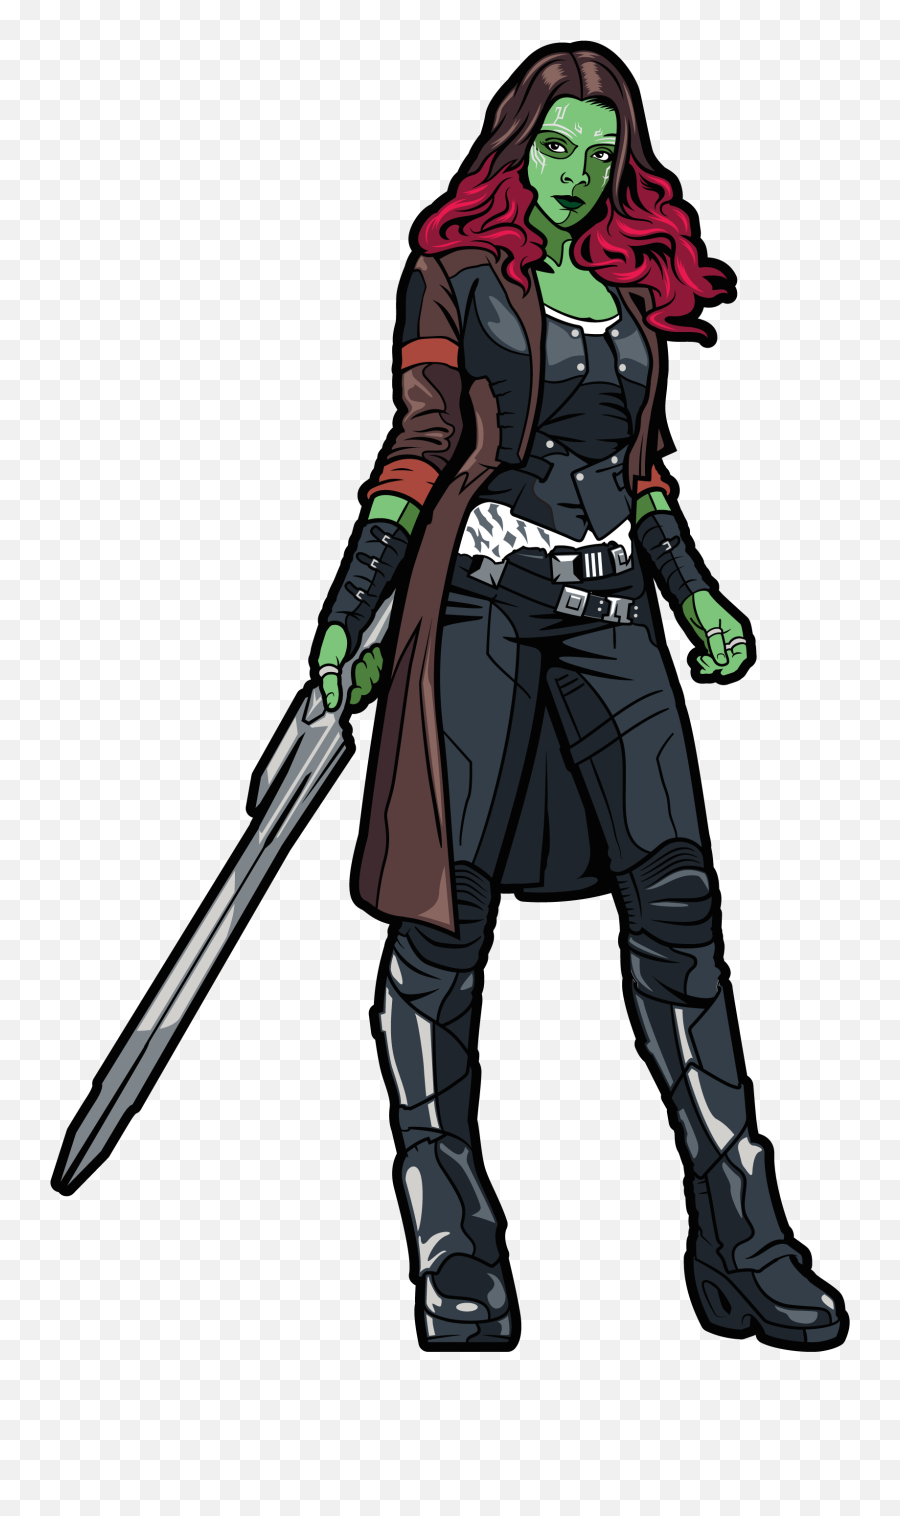 Gamora Images Posted By Sarah Johnson - Avengers Infinity War Gamora Toys Png,Icon Warchild Vest